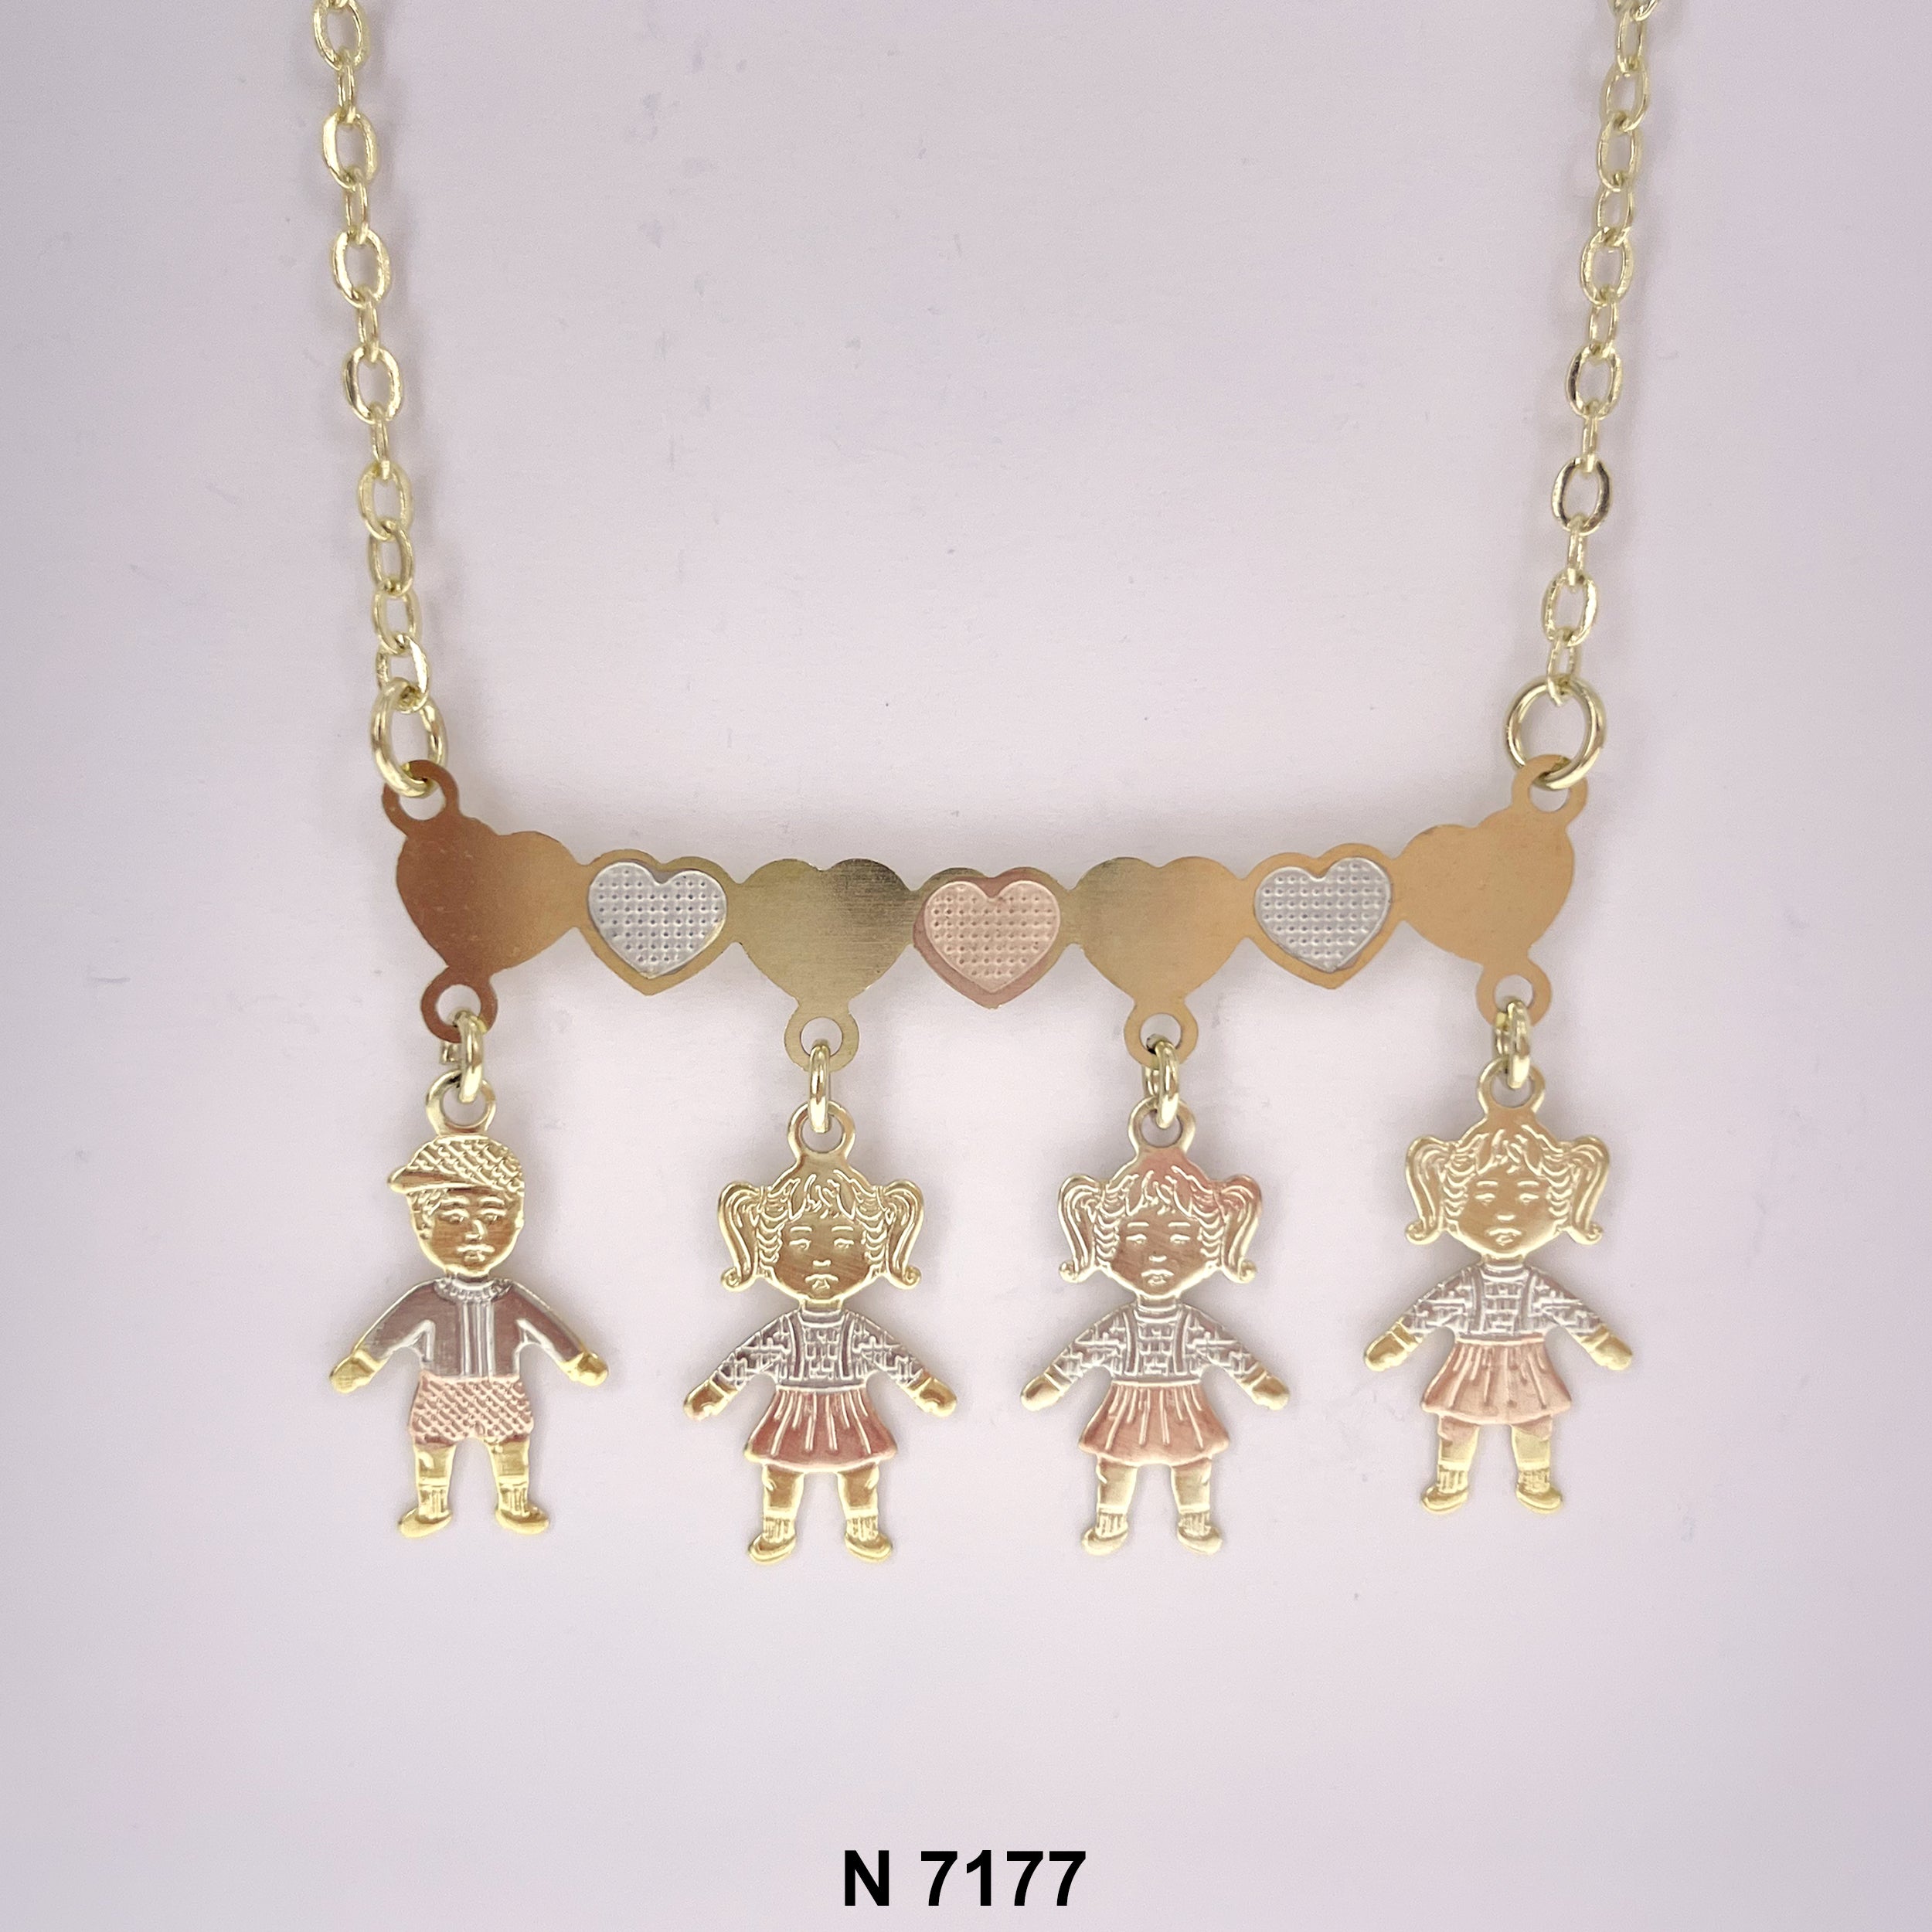 Necklace One Boy And  Three Girls N 7177